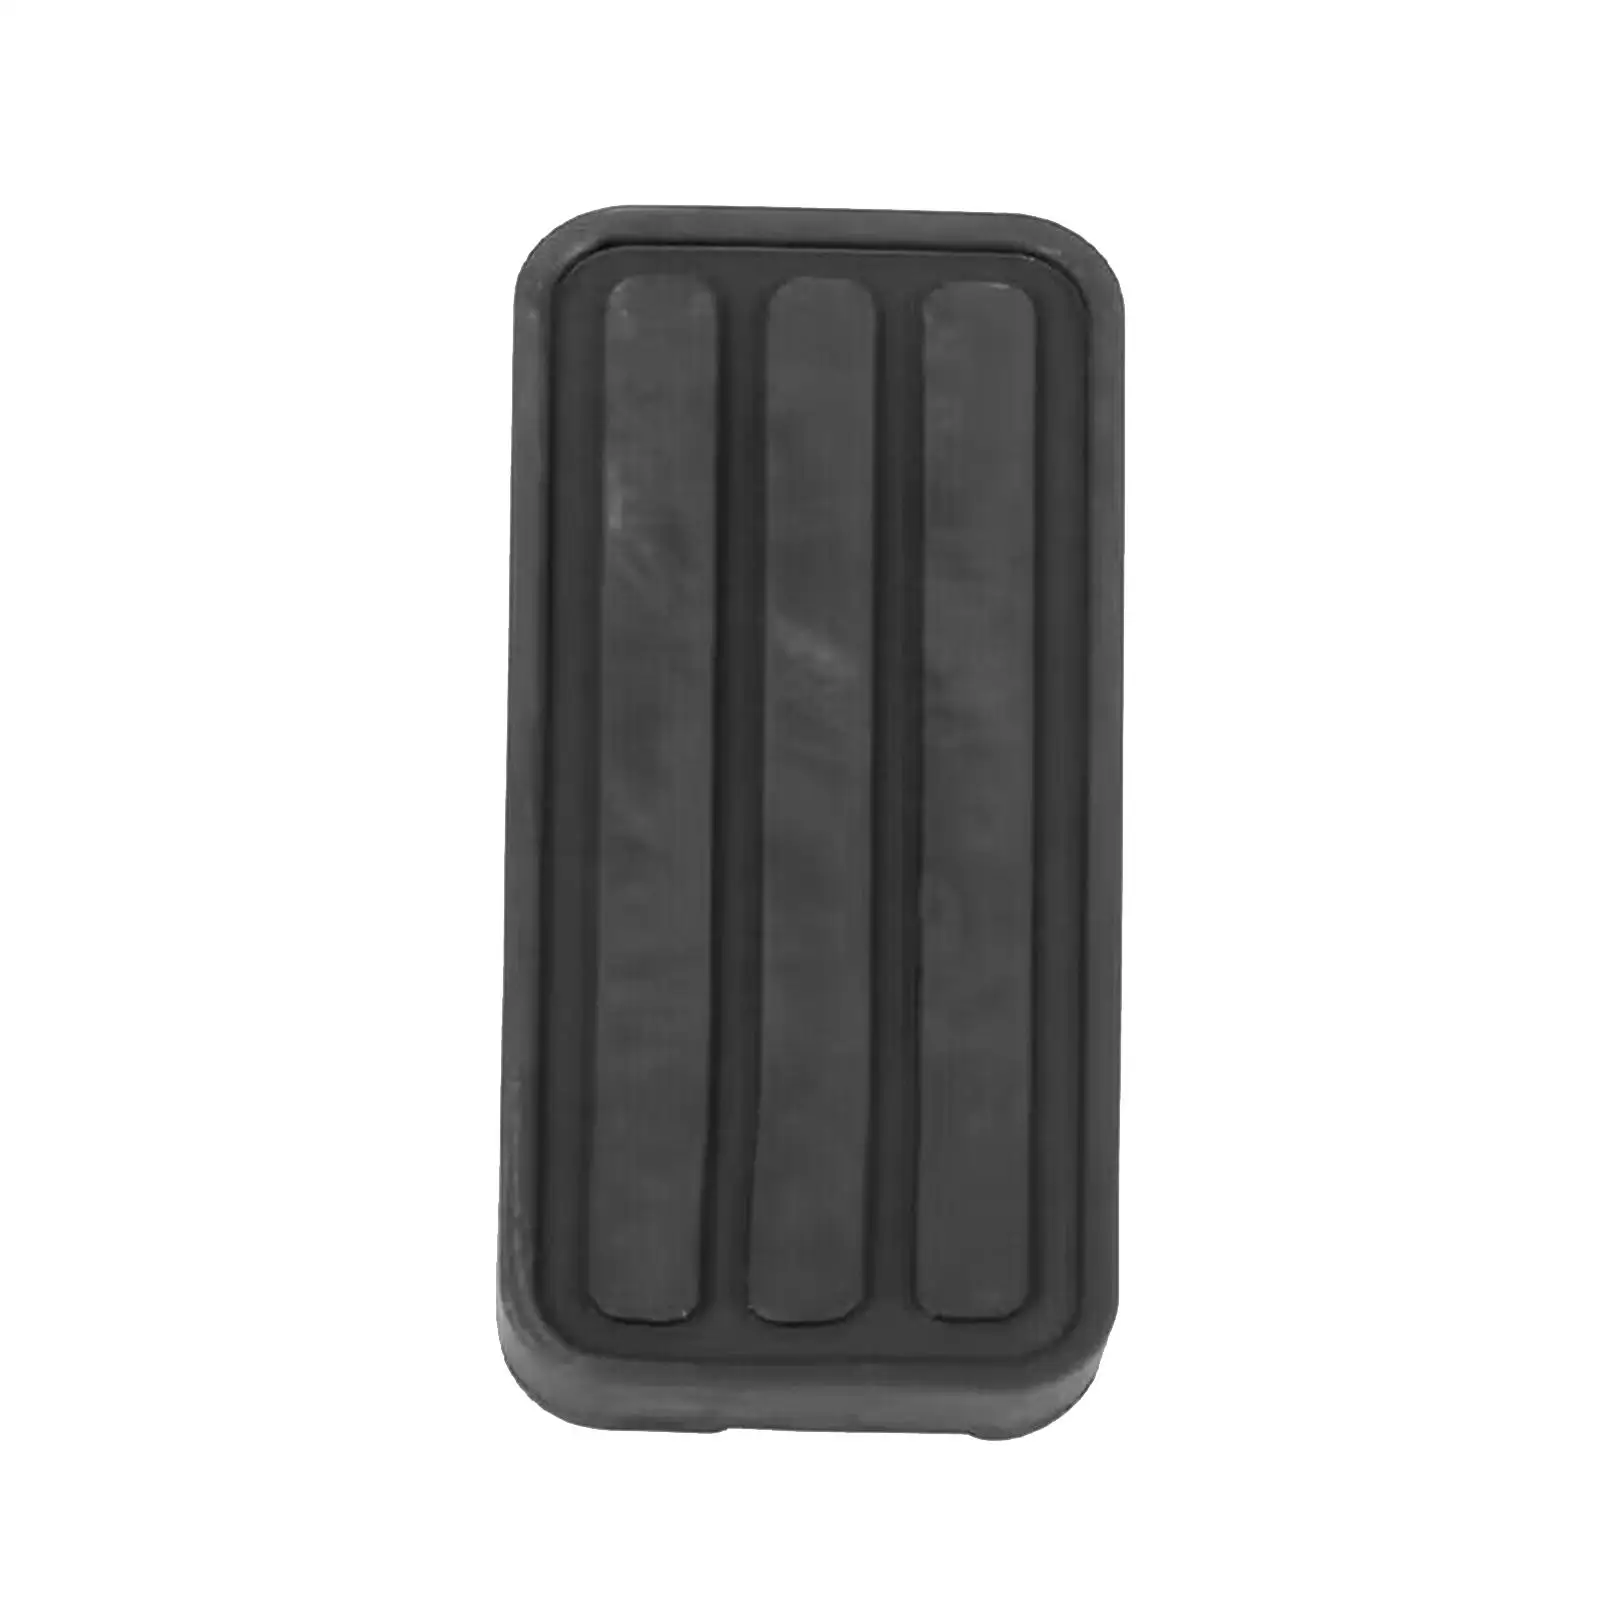 Gas Pedal Pad Premium Easy to Install Durable Accessories Accelerator Pedal Cover for VW T4 Transporter Spare Parts